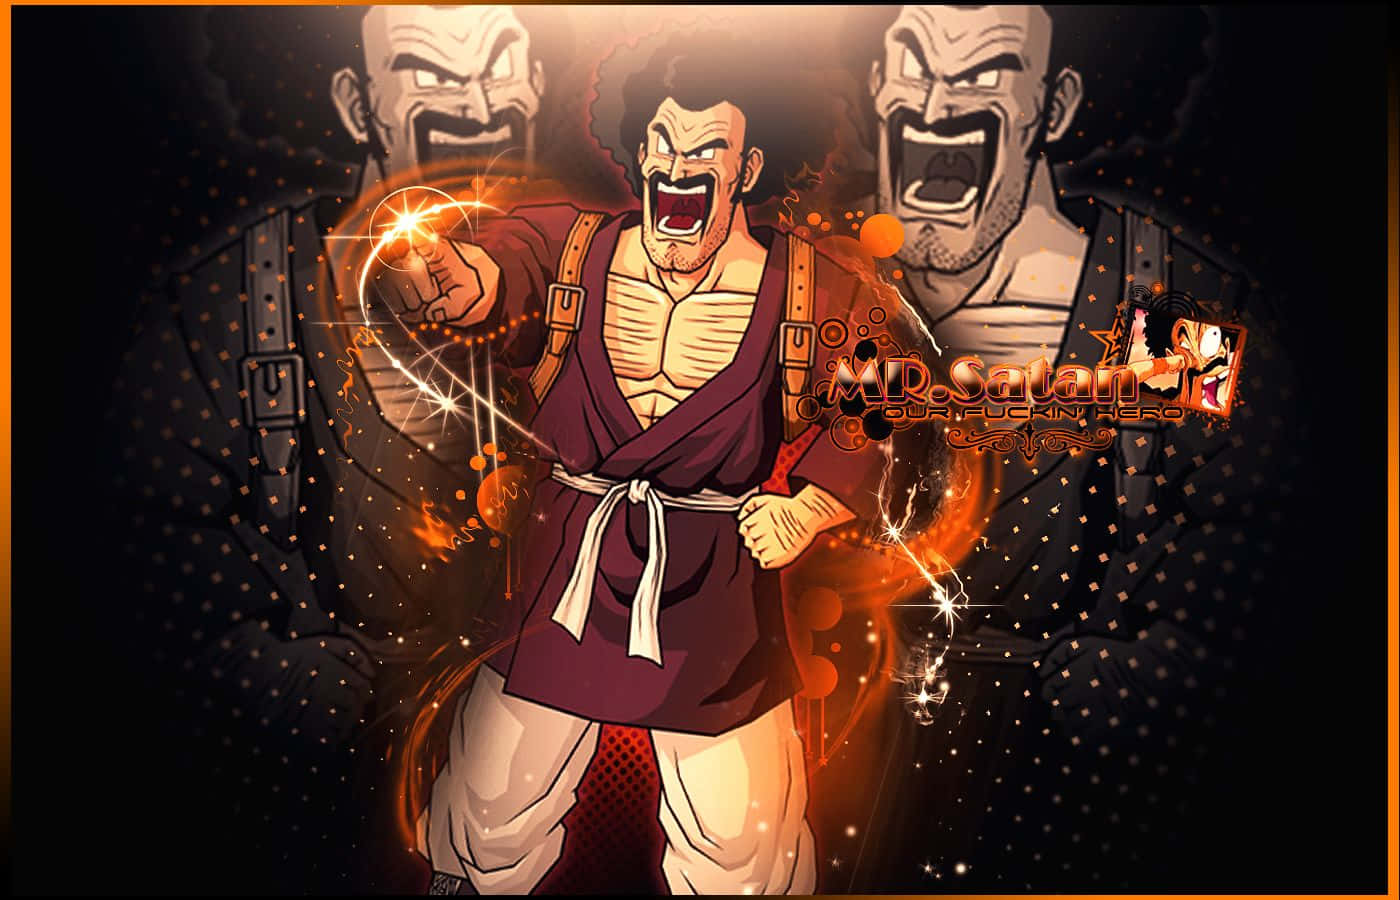 Follow the Trail to Victory with Hercule Satan Wallpaper